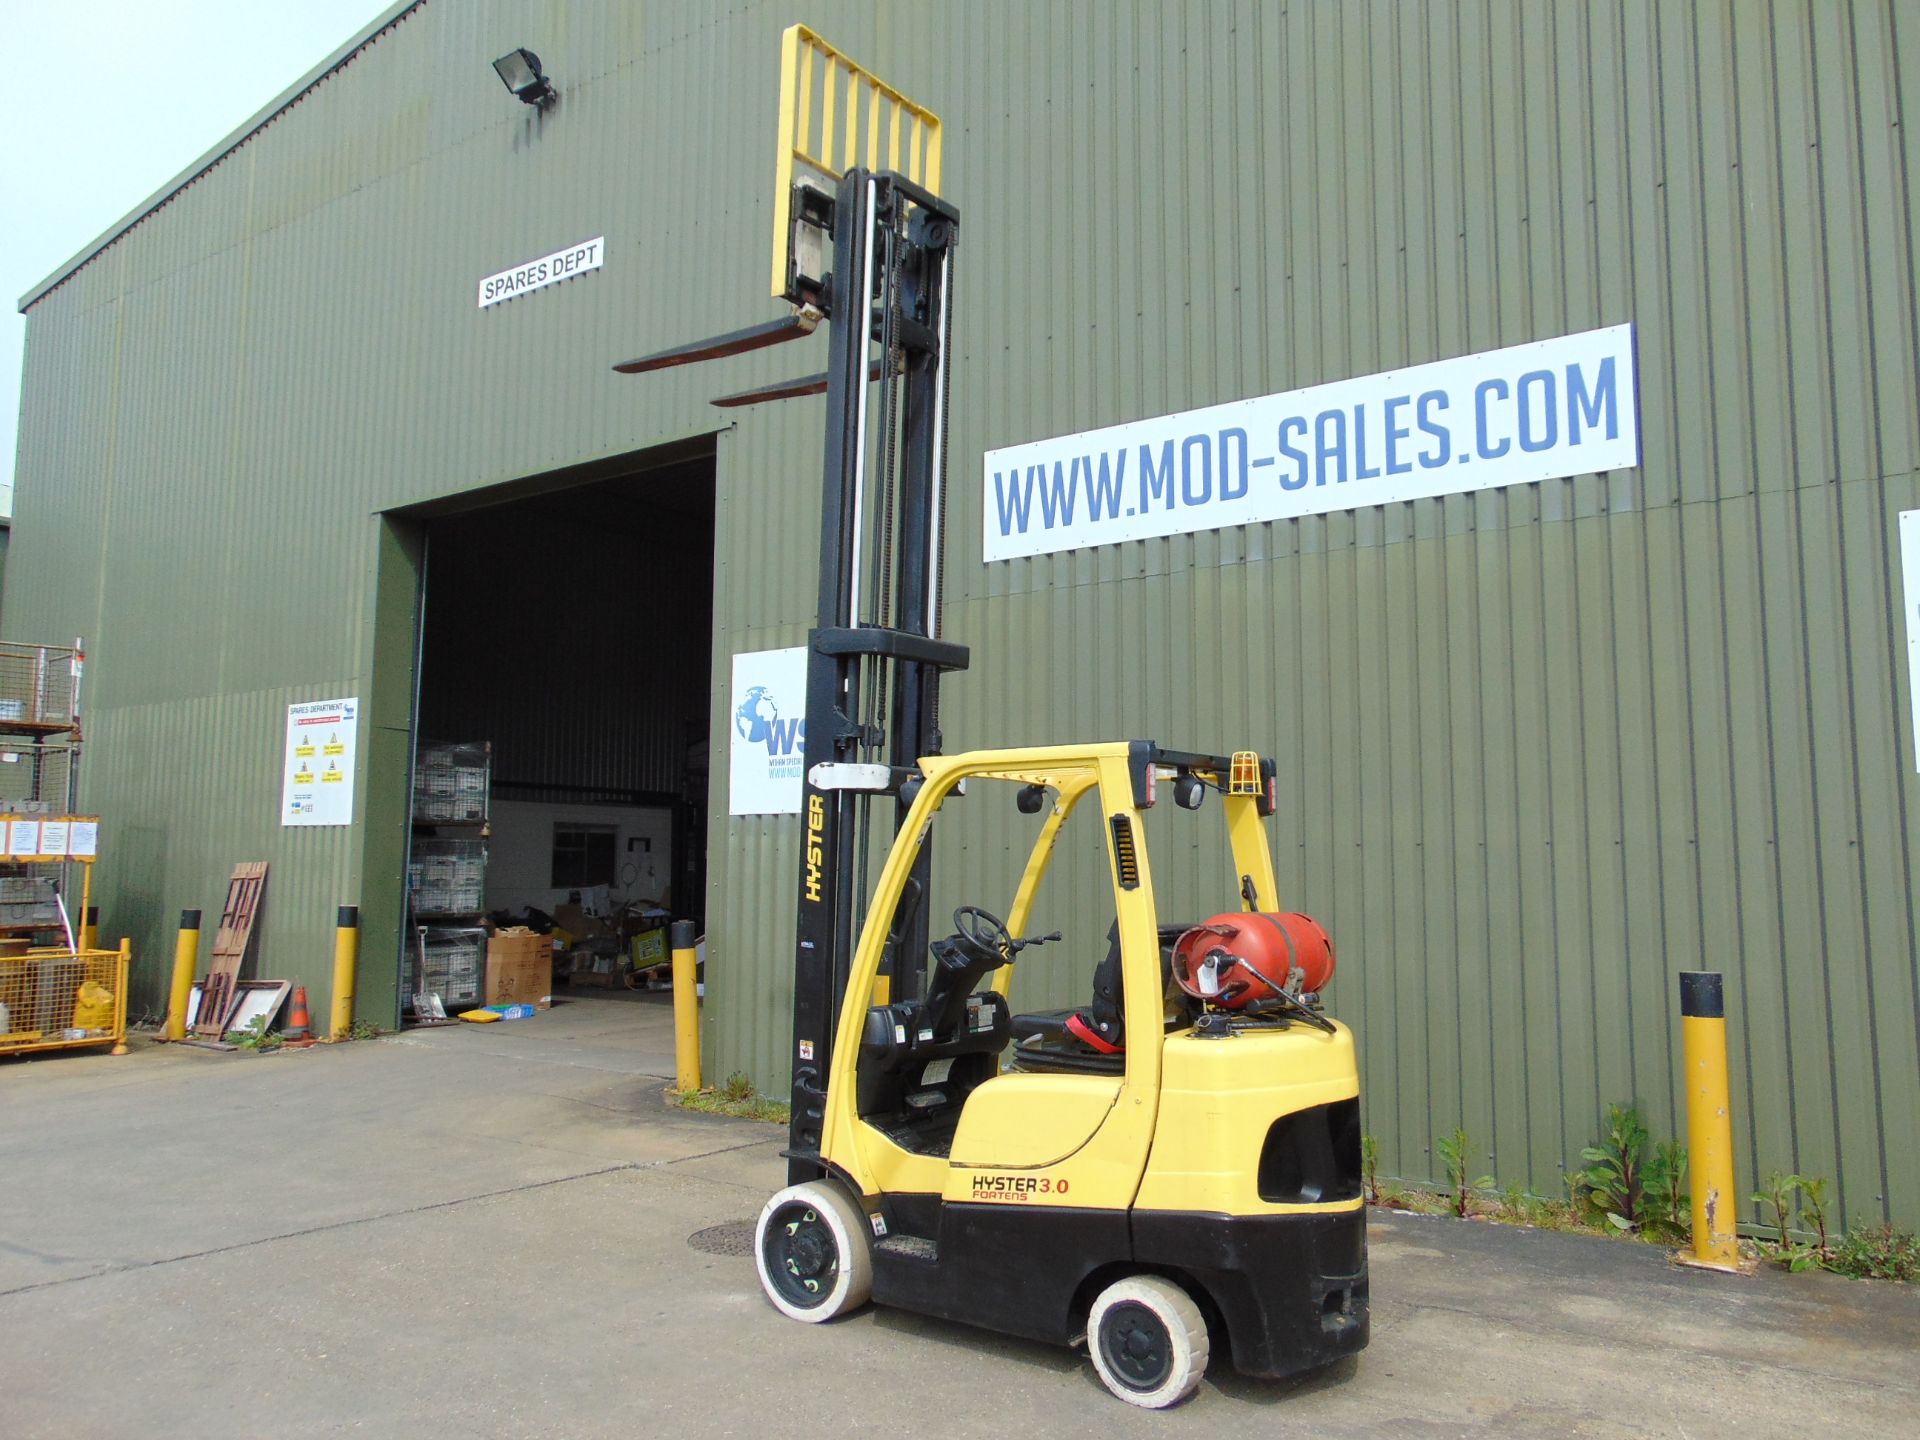 2015 Hyster S3.0FT - LPG / Gas Fork Lift Truck - Image 13 of 50